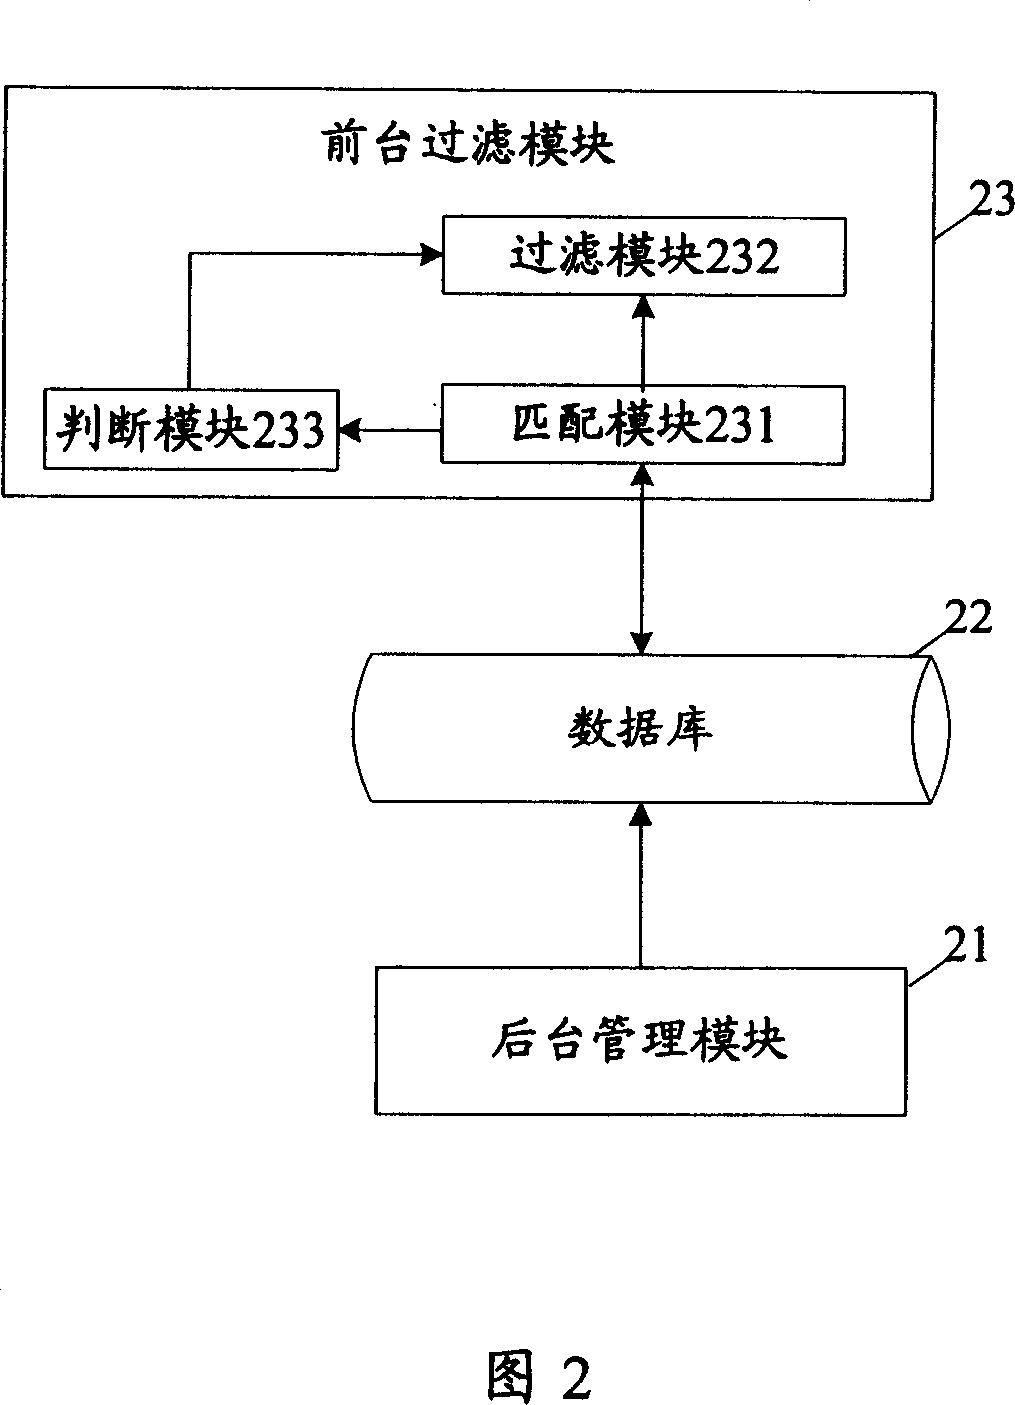 Filtering method and filtering system for communication information in communication system